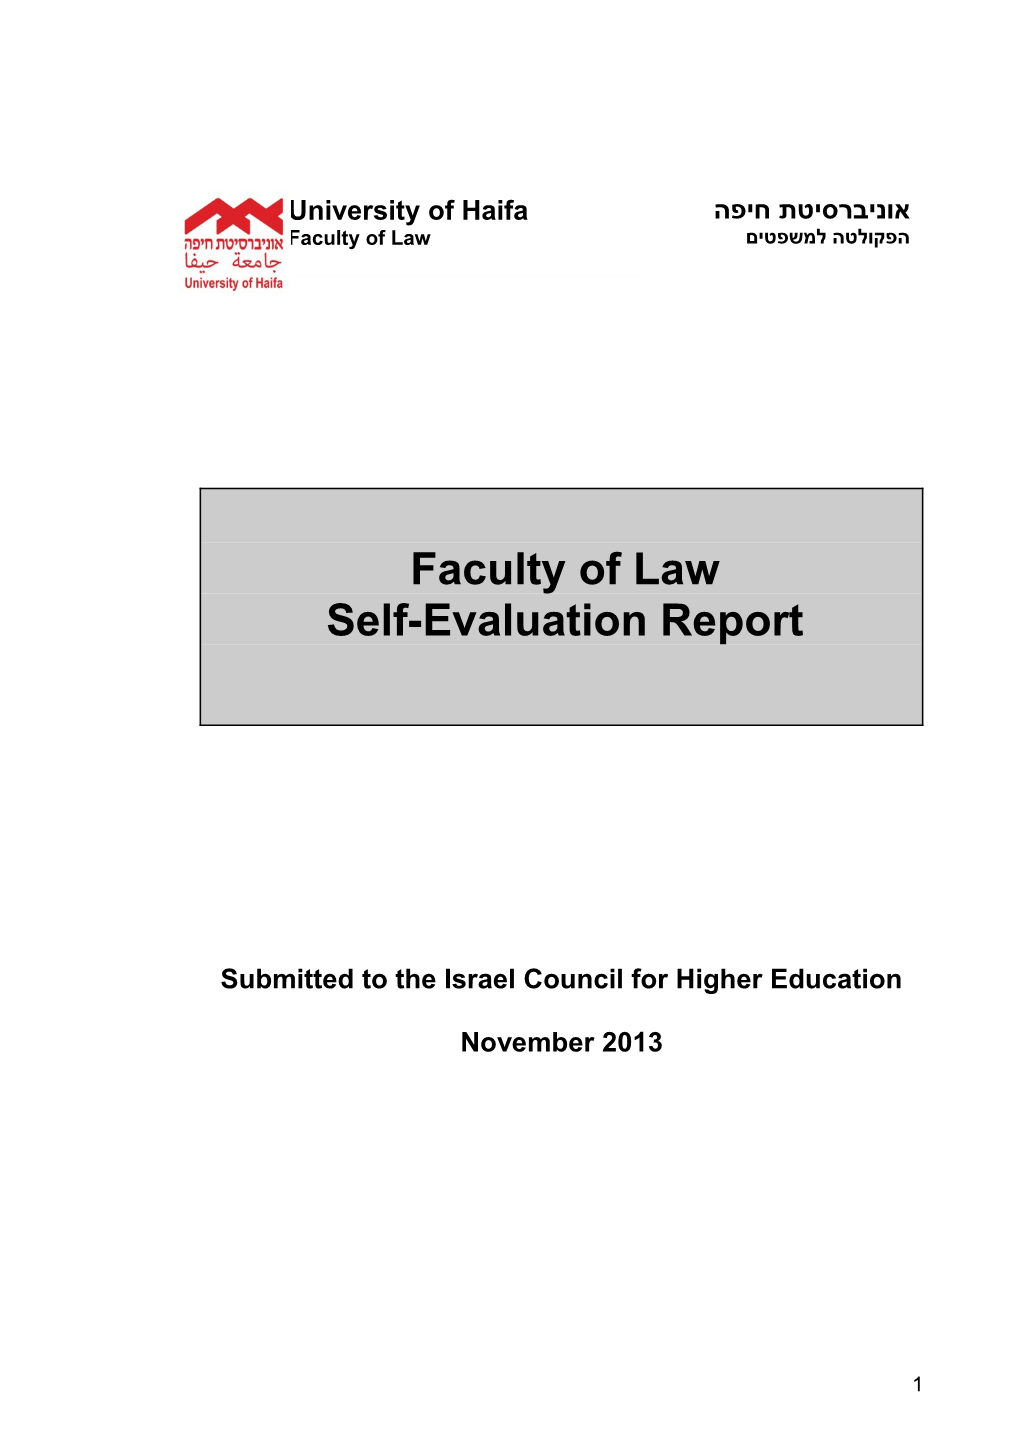 Submitted to the Israel Council for Higher Education